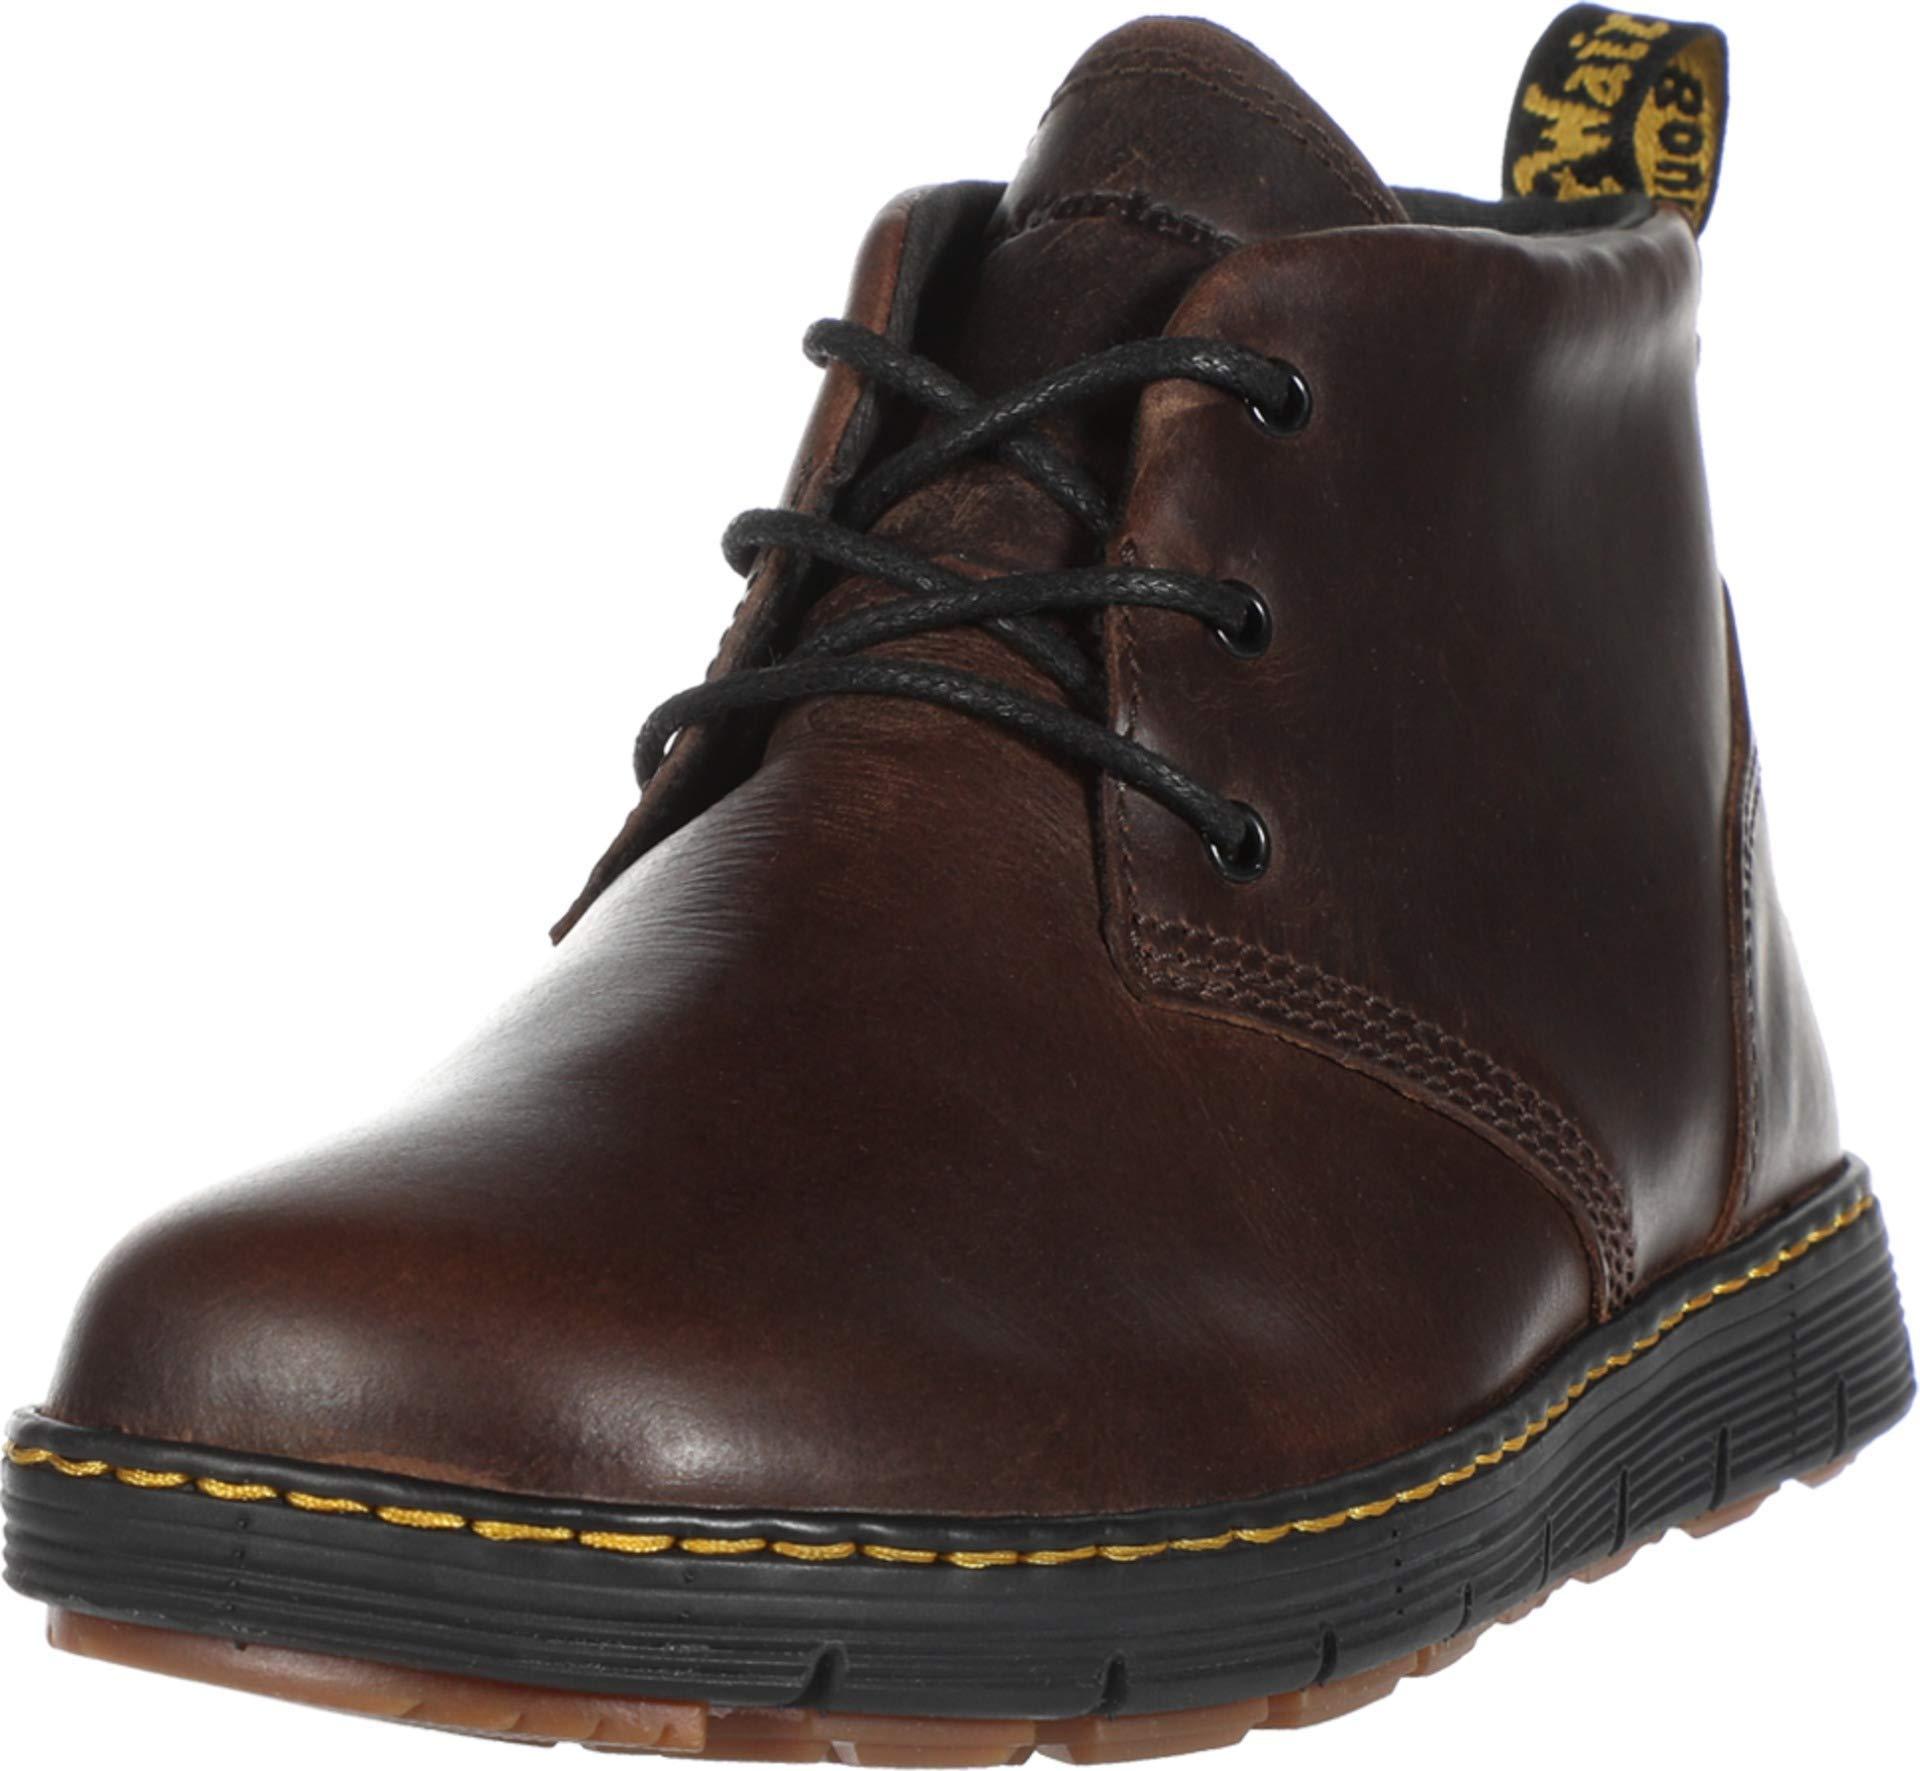 Dr. Martens Cairo Chukka Fashion Boot in Brown (Black) for Men - Save 46% -  Lyst